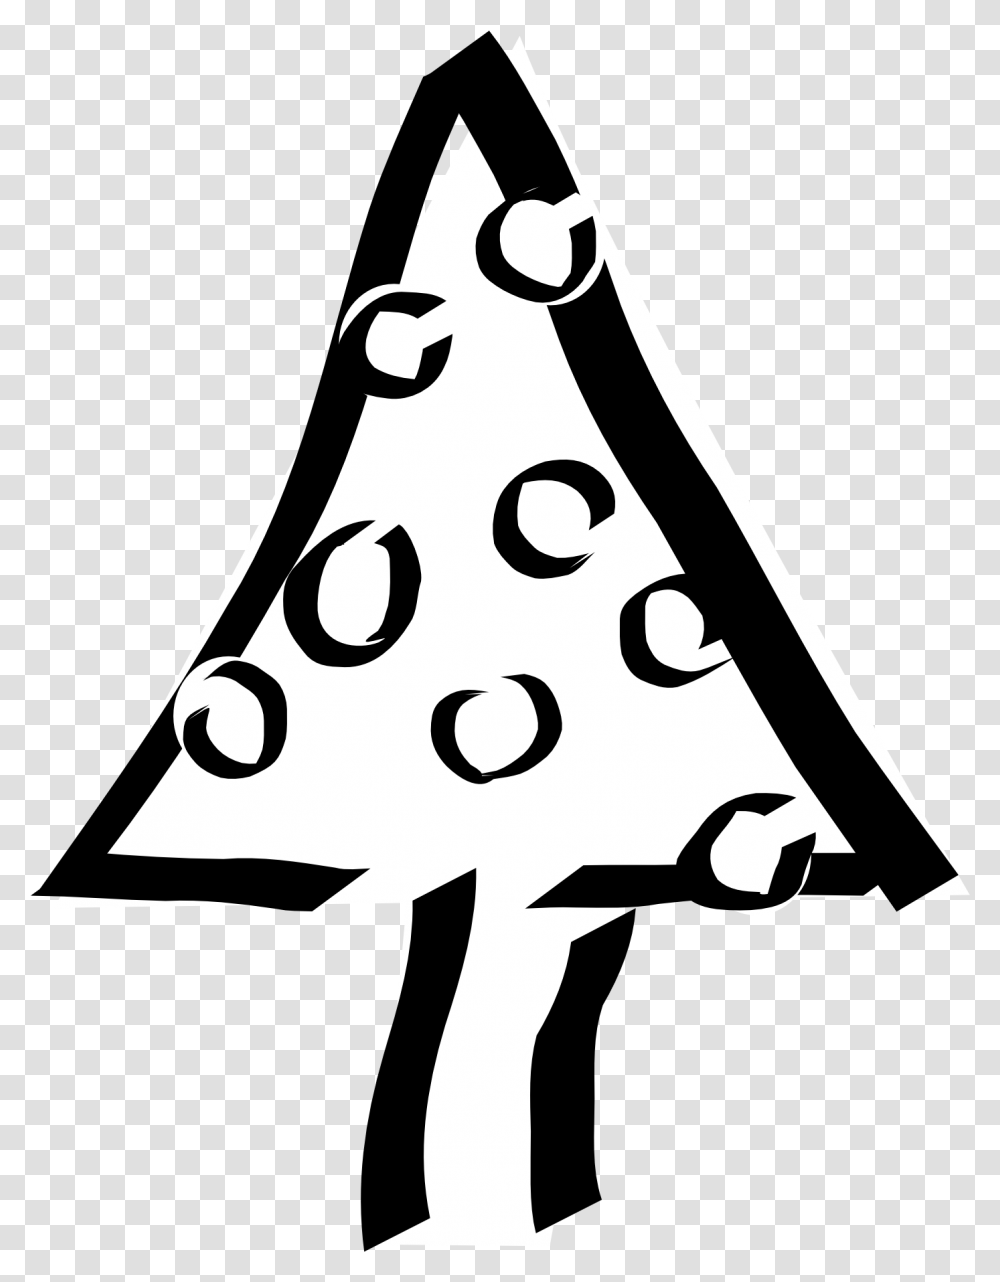 Clip Art Christmas Tree Black And White, Plant, Ornament, Triangle, Stencil Transparent Png